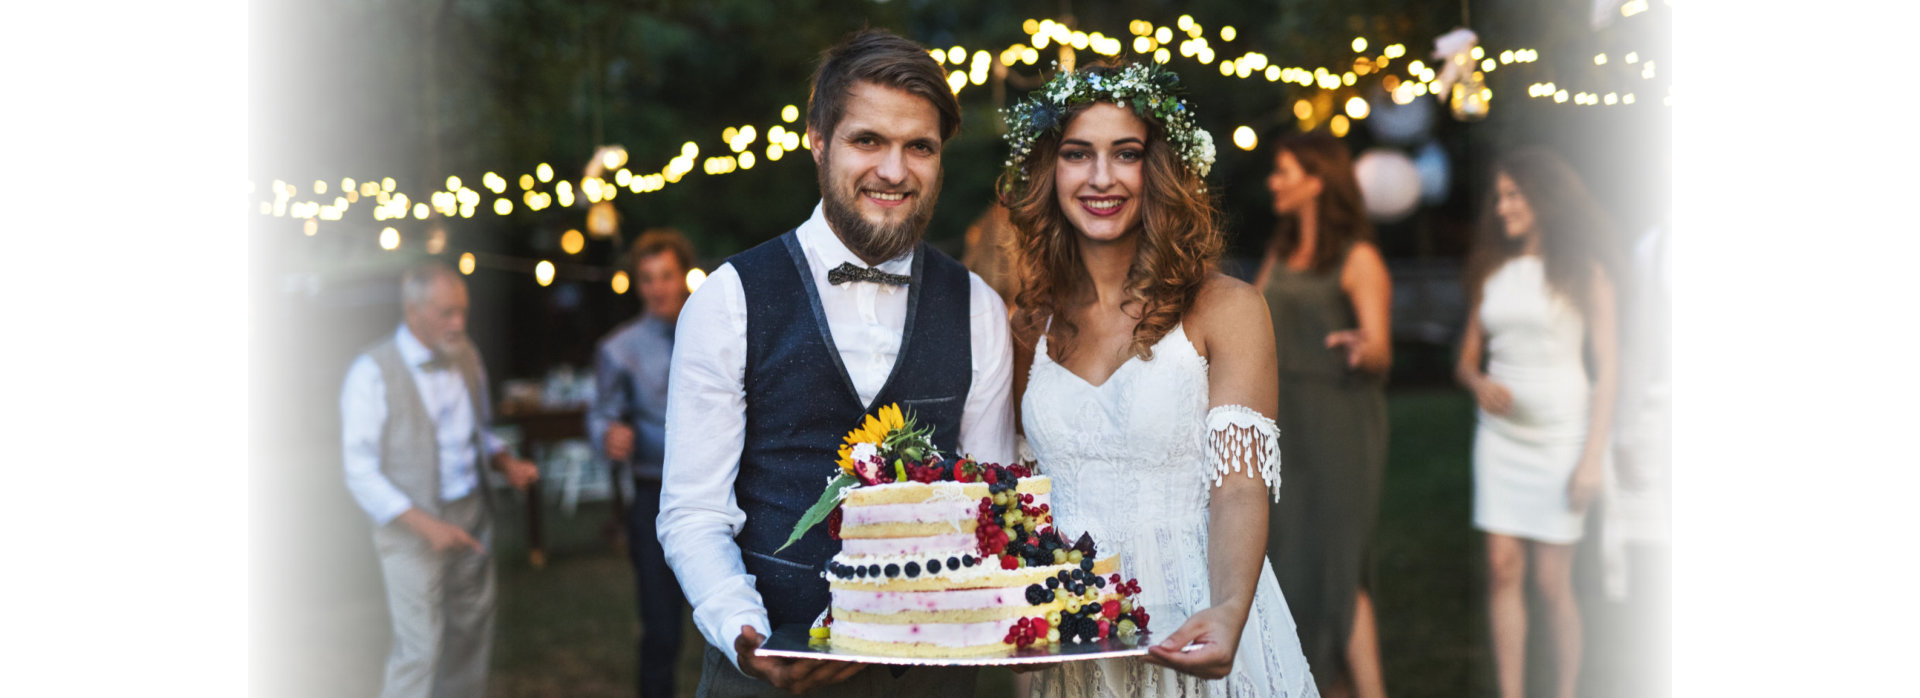 Bride and groom holding a cake at wedding reception